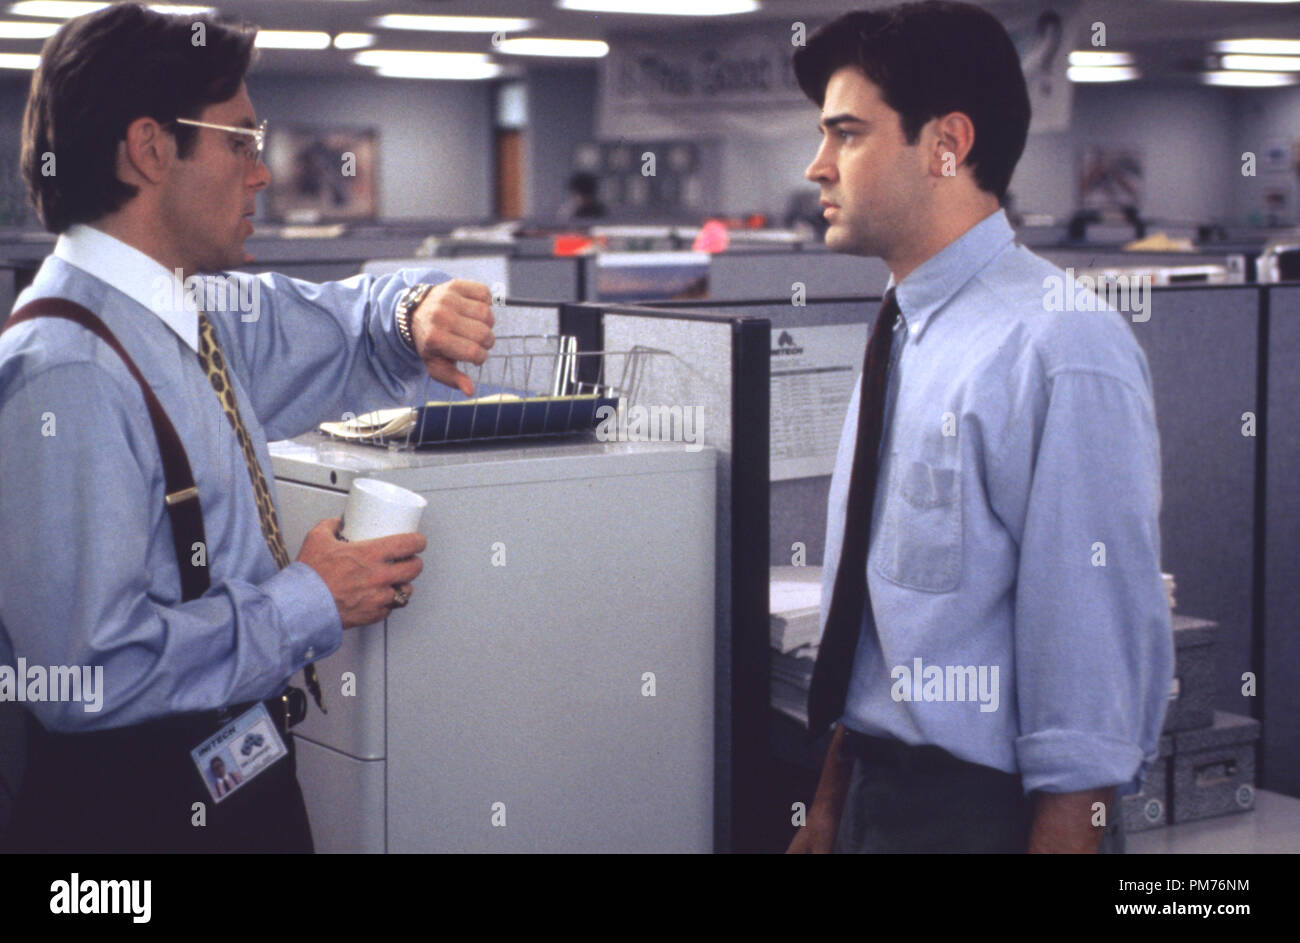 Film Still / Publicity Still from 'Office Space' Gary Cole, Ron Livingston © 1999 20th Century Fox Photo Credit: Van Redin   File Reference # 30973498THA  For Editorial Use Only -  All Rights Reserved Stock Photo